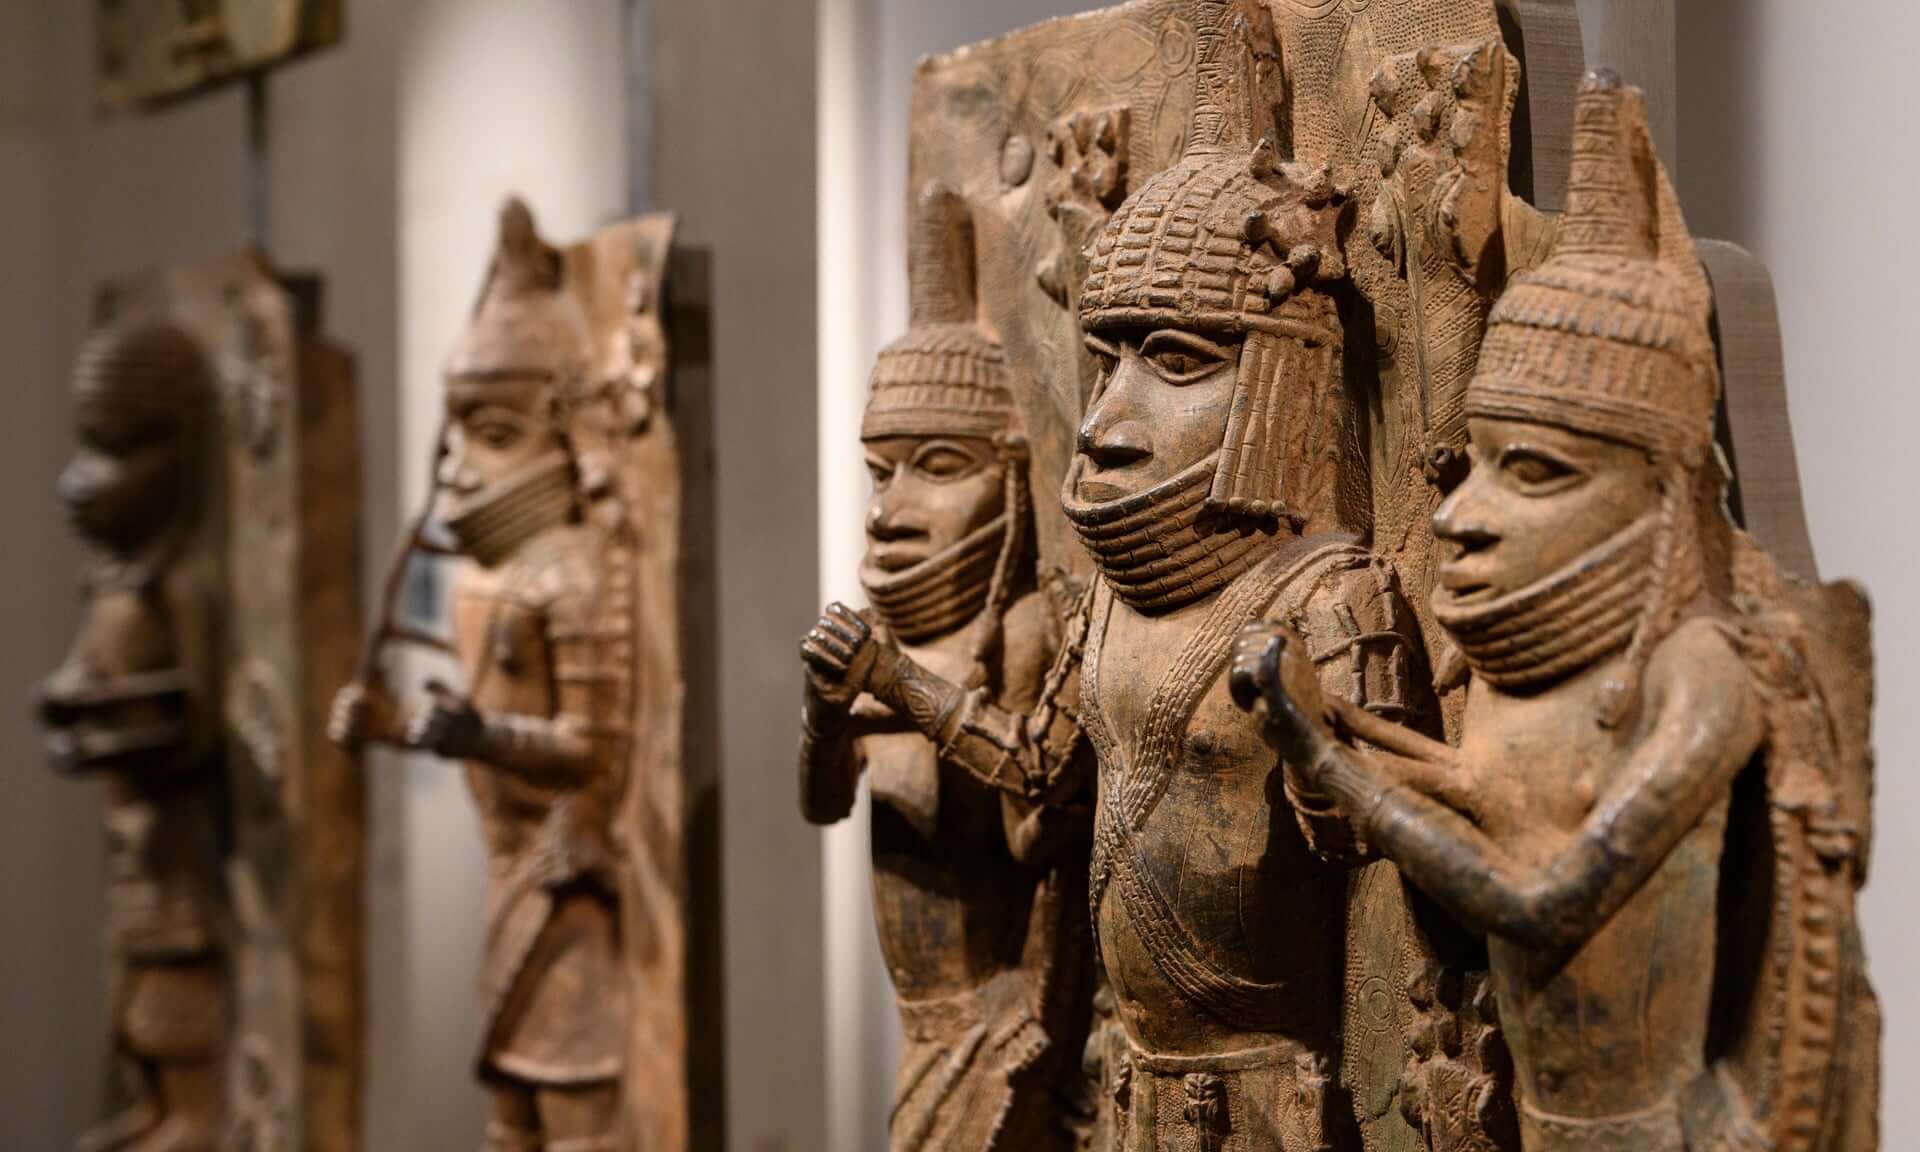 Germany Developing Plan to Return Stolen Artefacts From Colonial Era to Nigeria